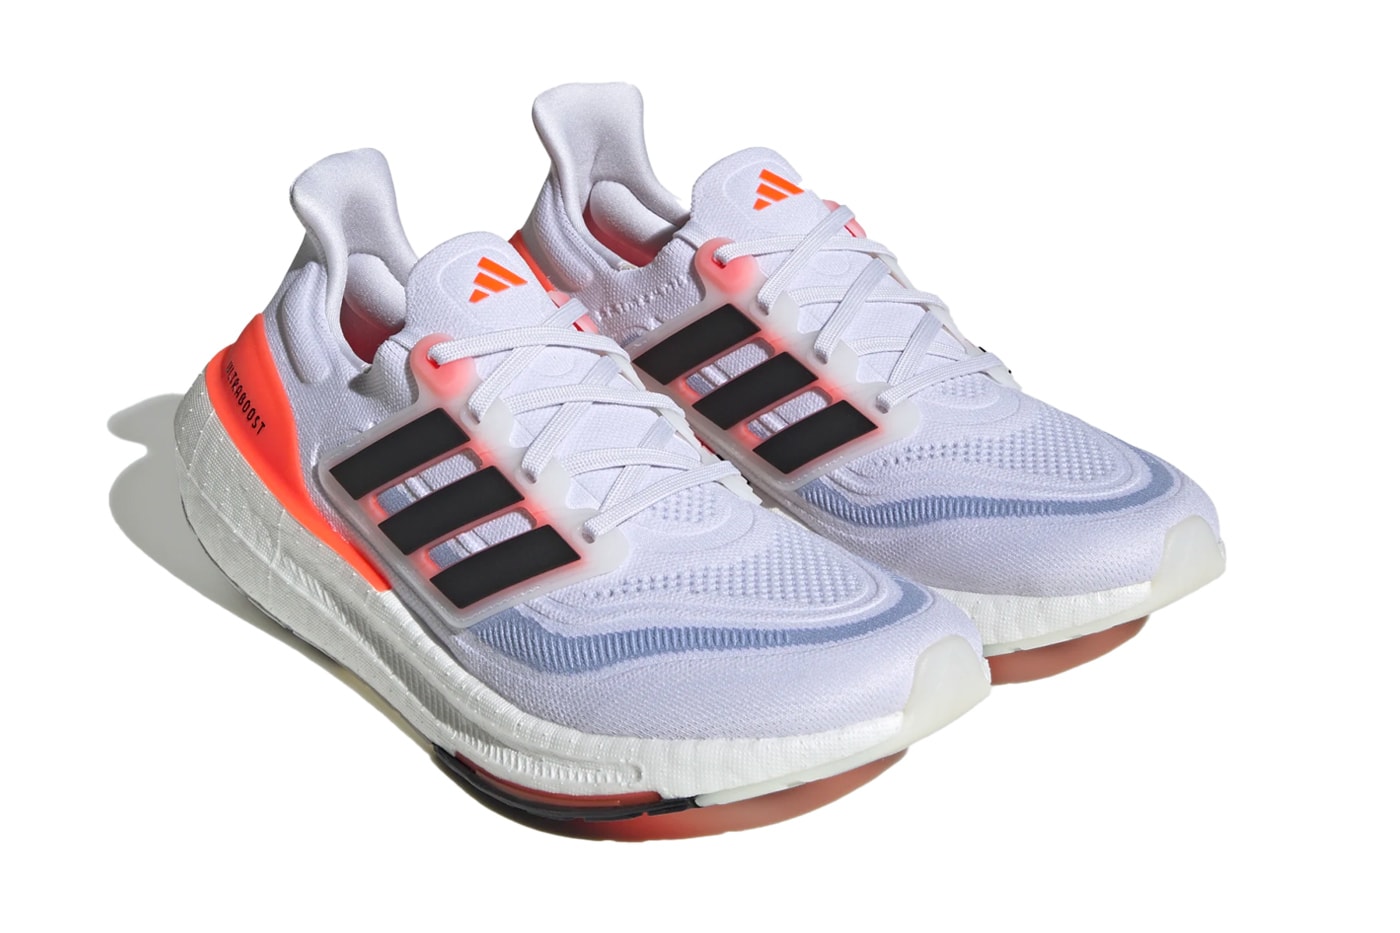 adidas Ultraboost 23 Light Best Running Shoes Right Now to Buy 2023